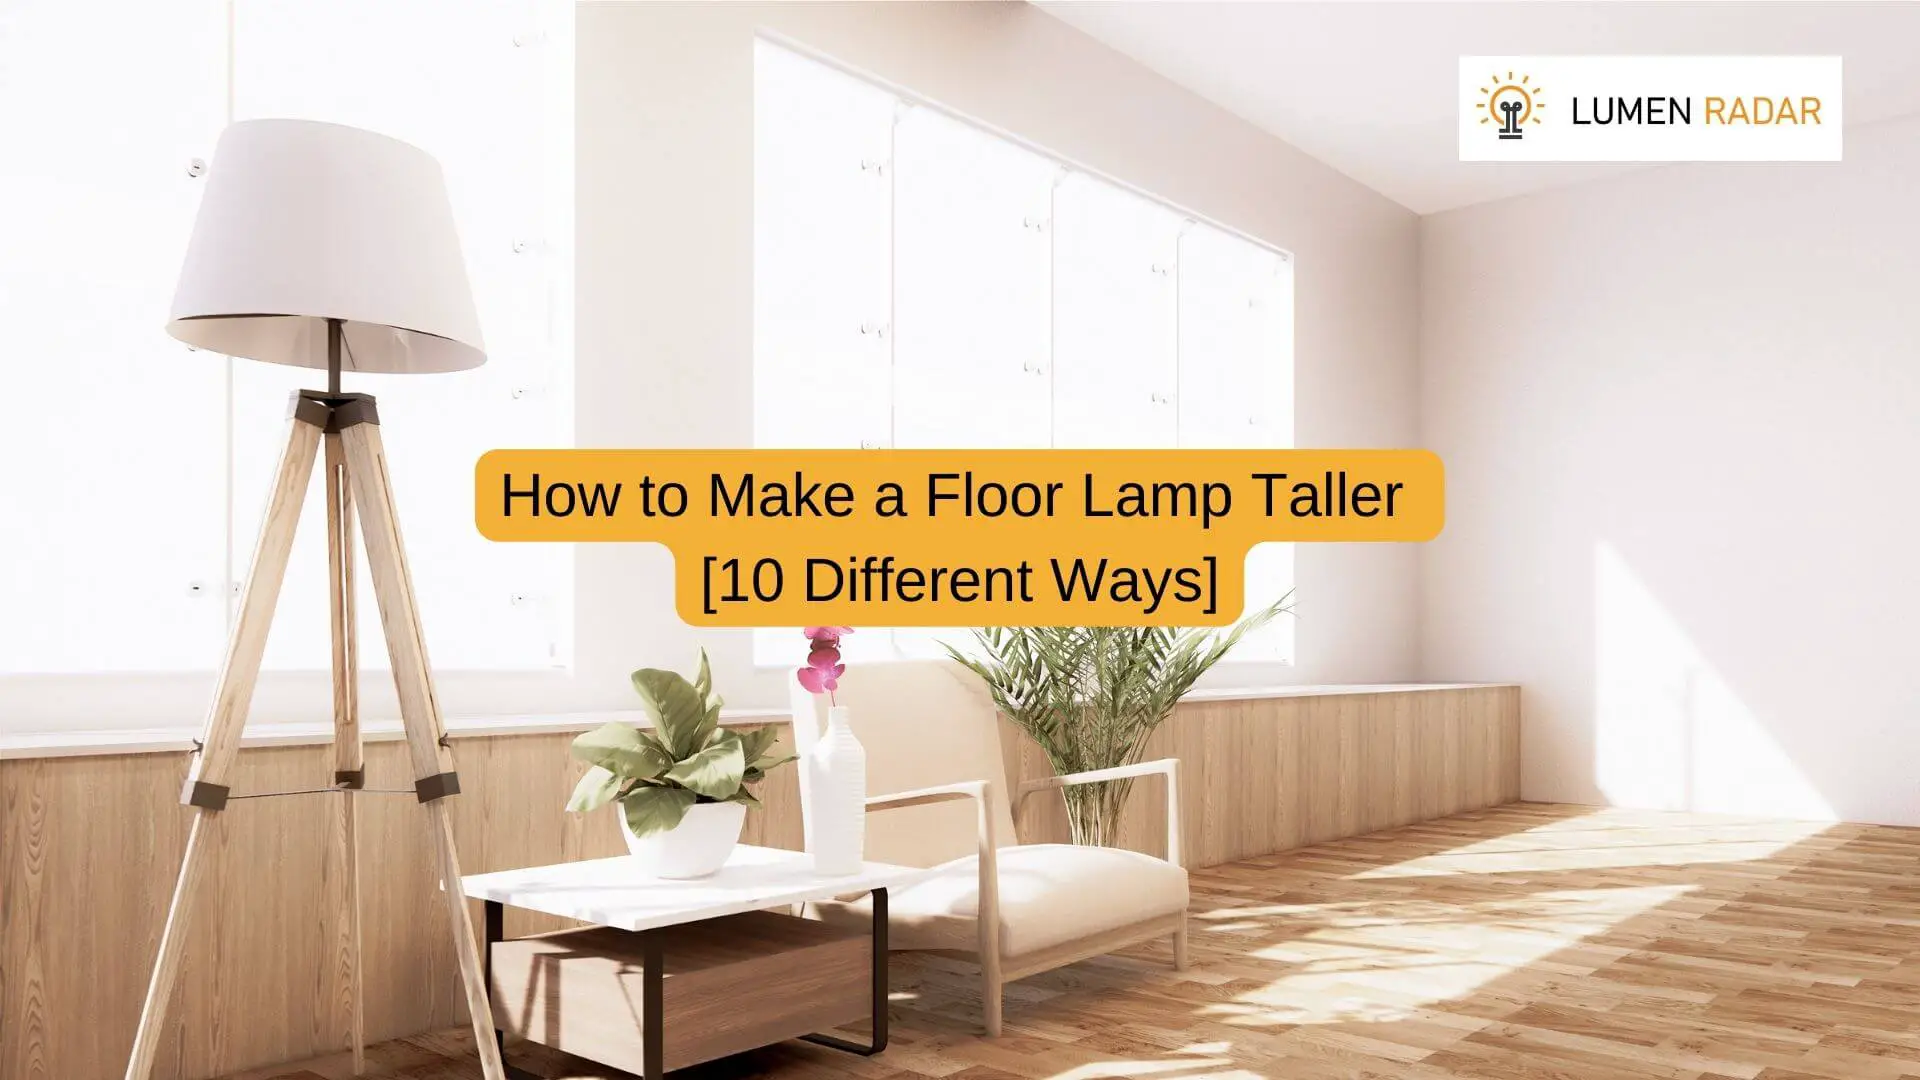 How to Make a Floor Lamp Taller